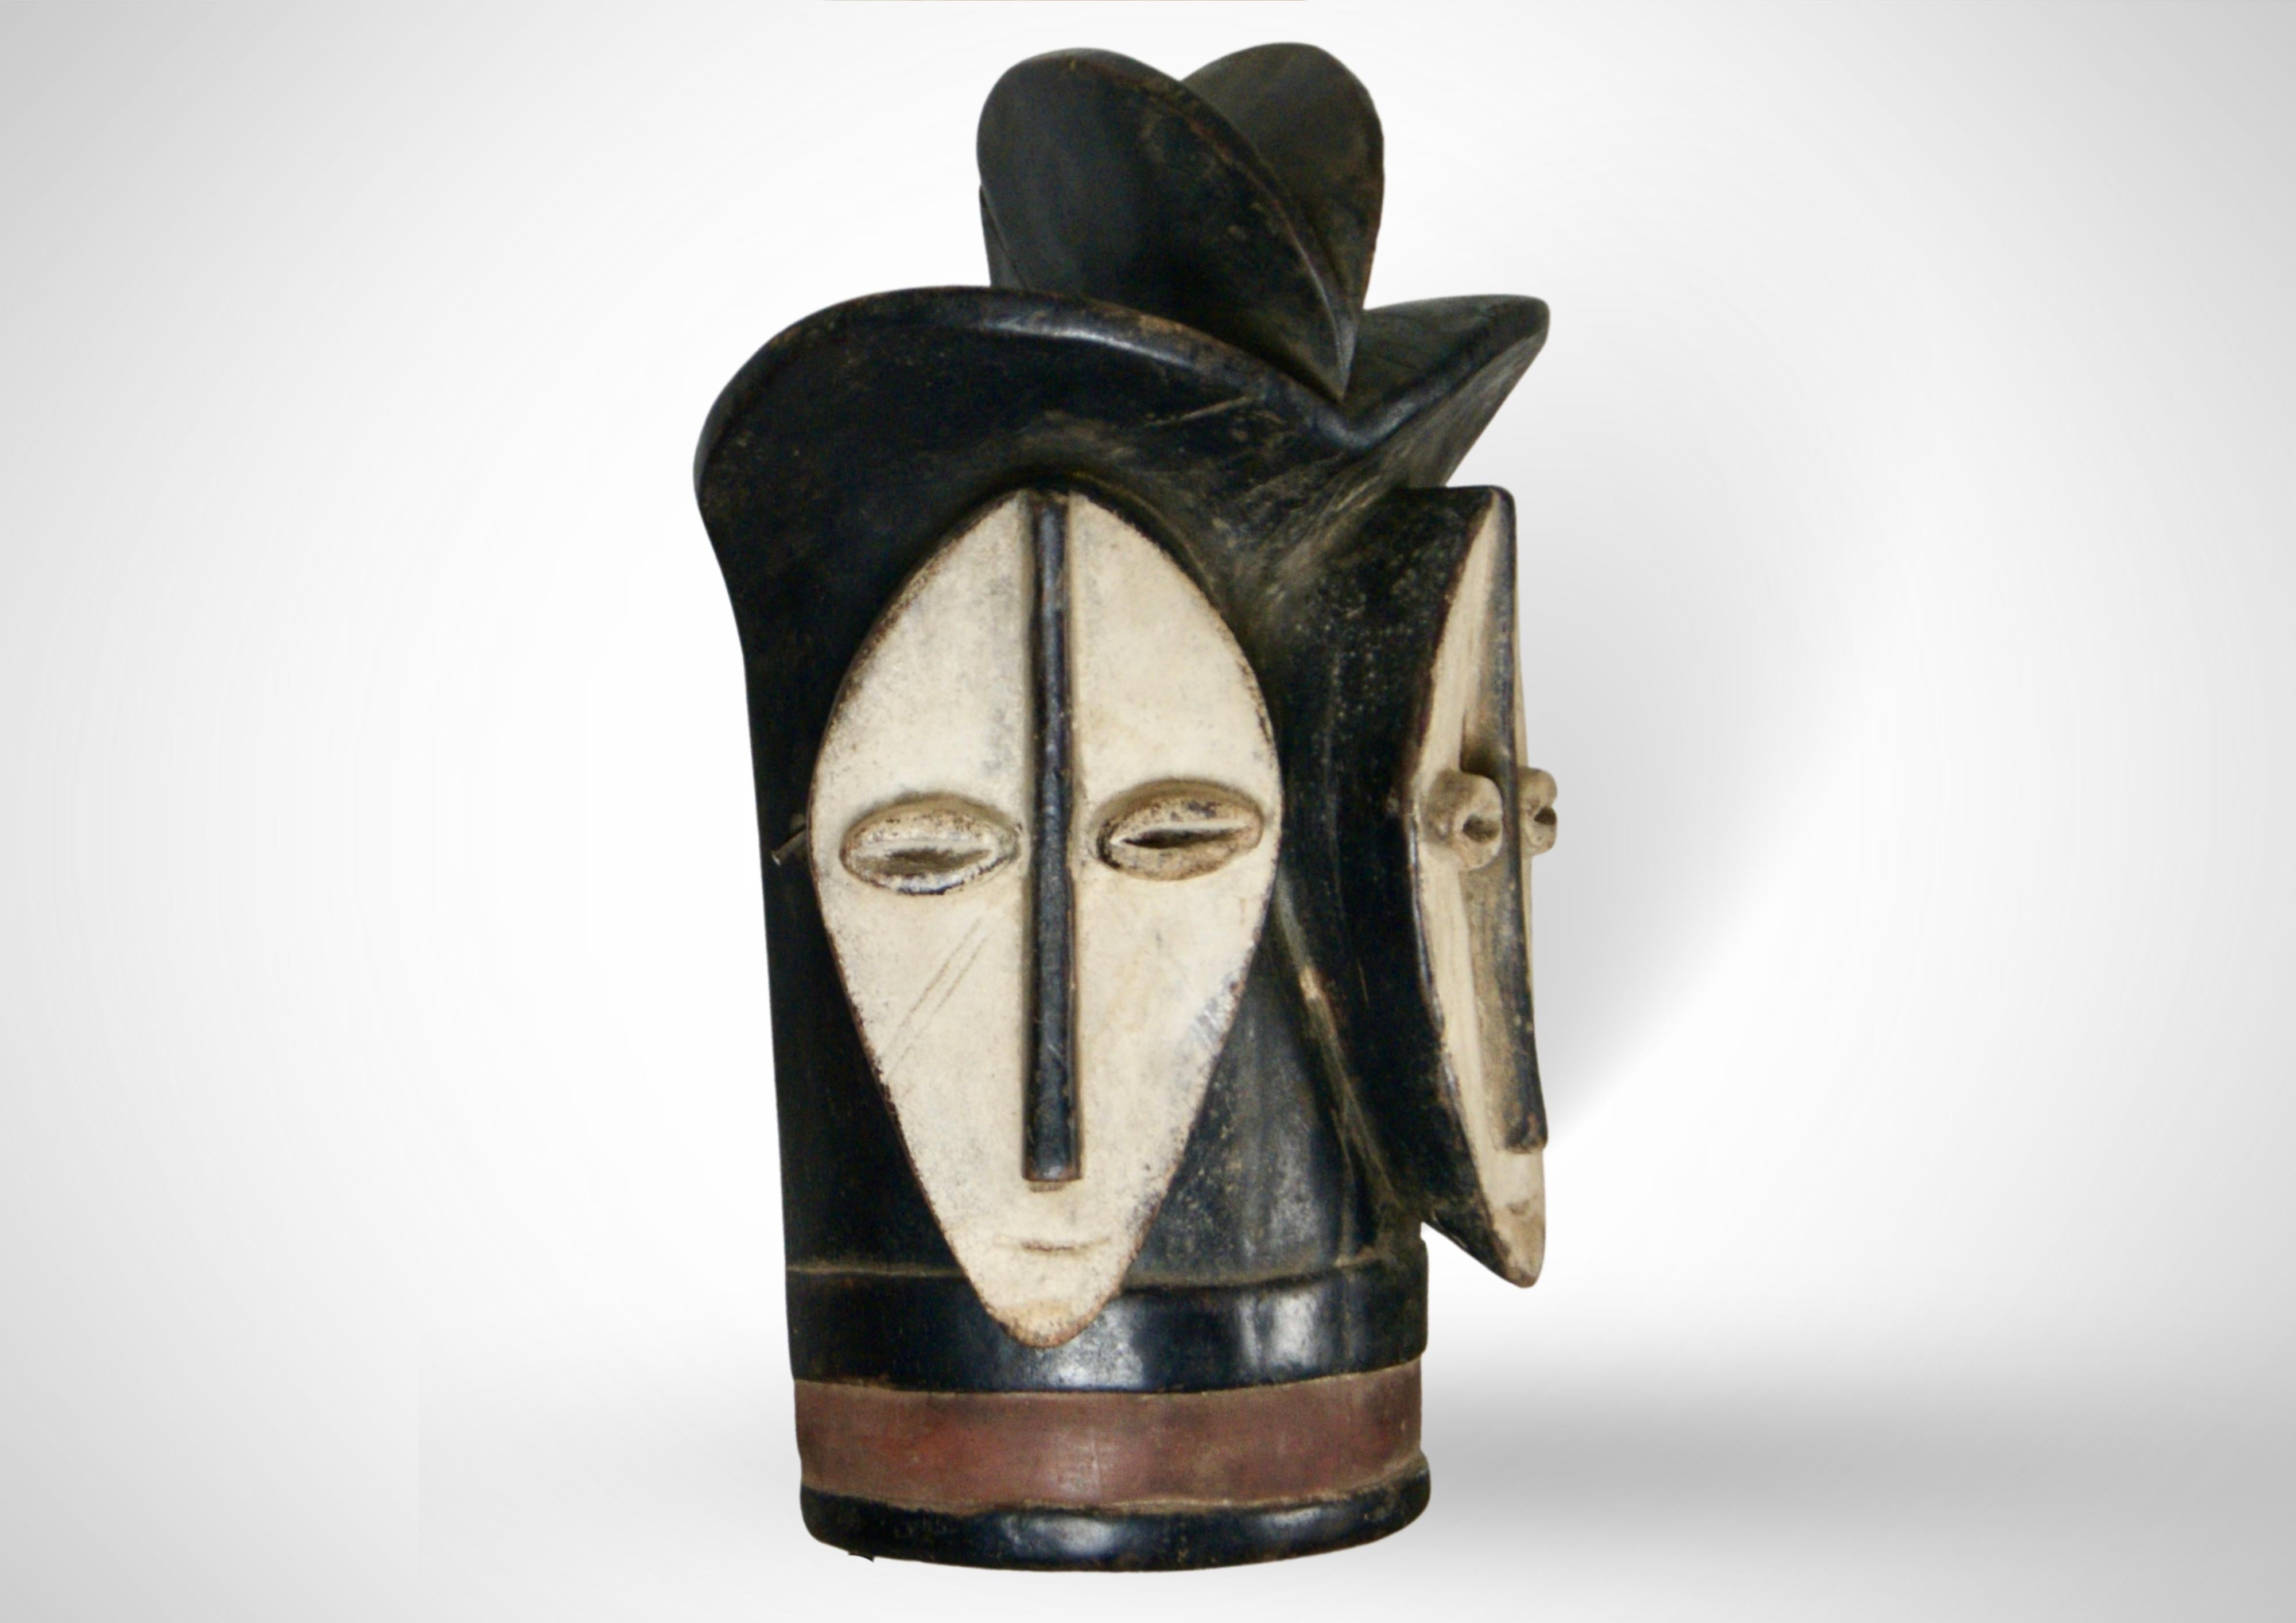 Rare large twin faced Lega mask of the Bwami society in Democratic Republic of Congo (DRC), circa 1930s.
This mask is very rare in that it is a large size ceremonial mask and would have been made for a set of high ranking twin males.
Regular Lega